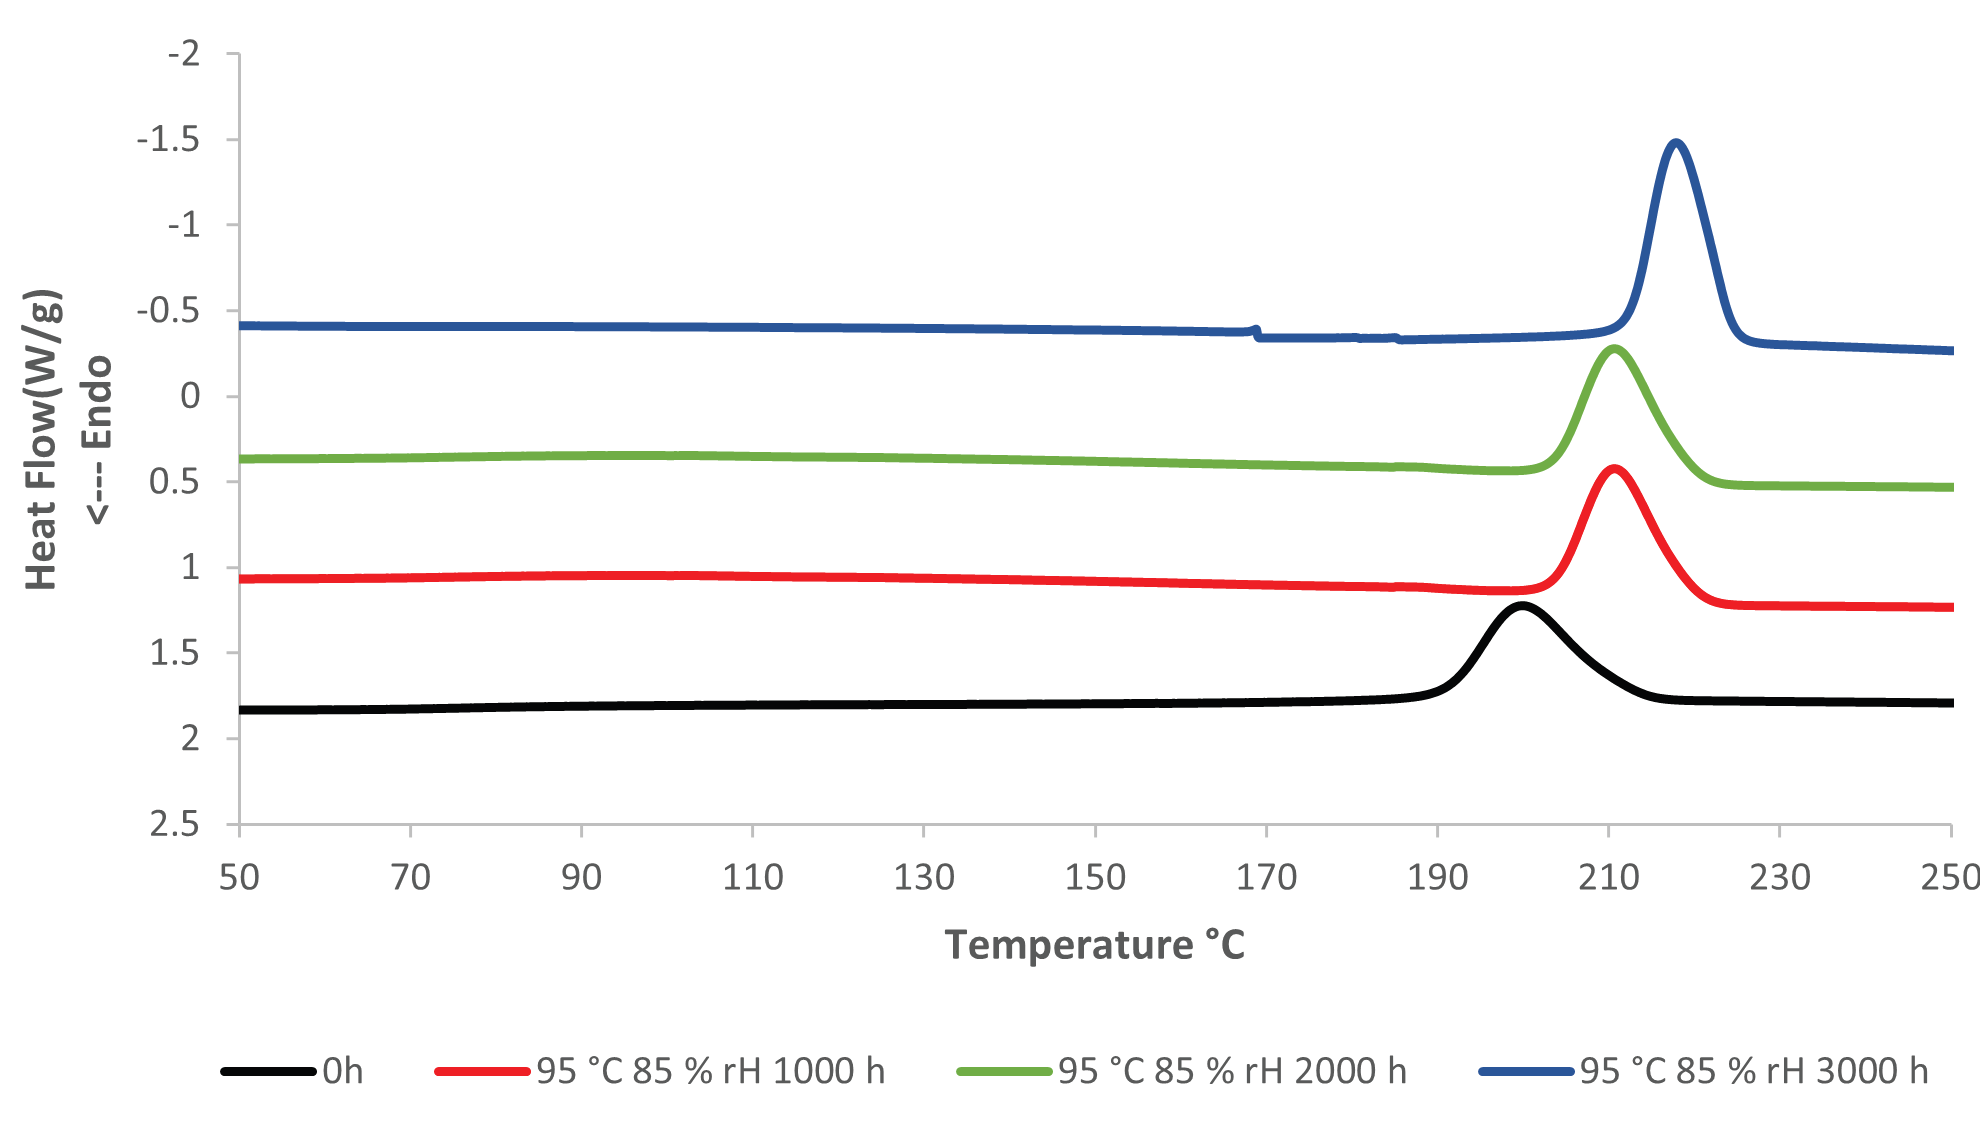 DSC Cooling results, unaged (0h) and aged at 95 °C and 85 % rH